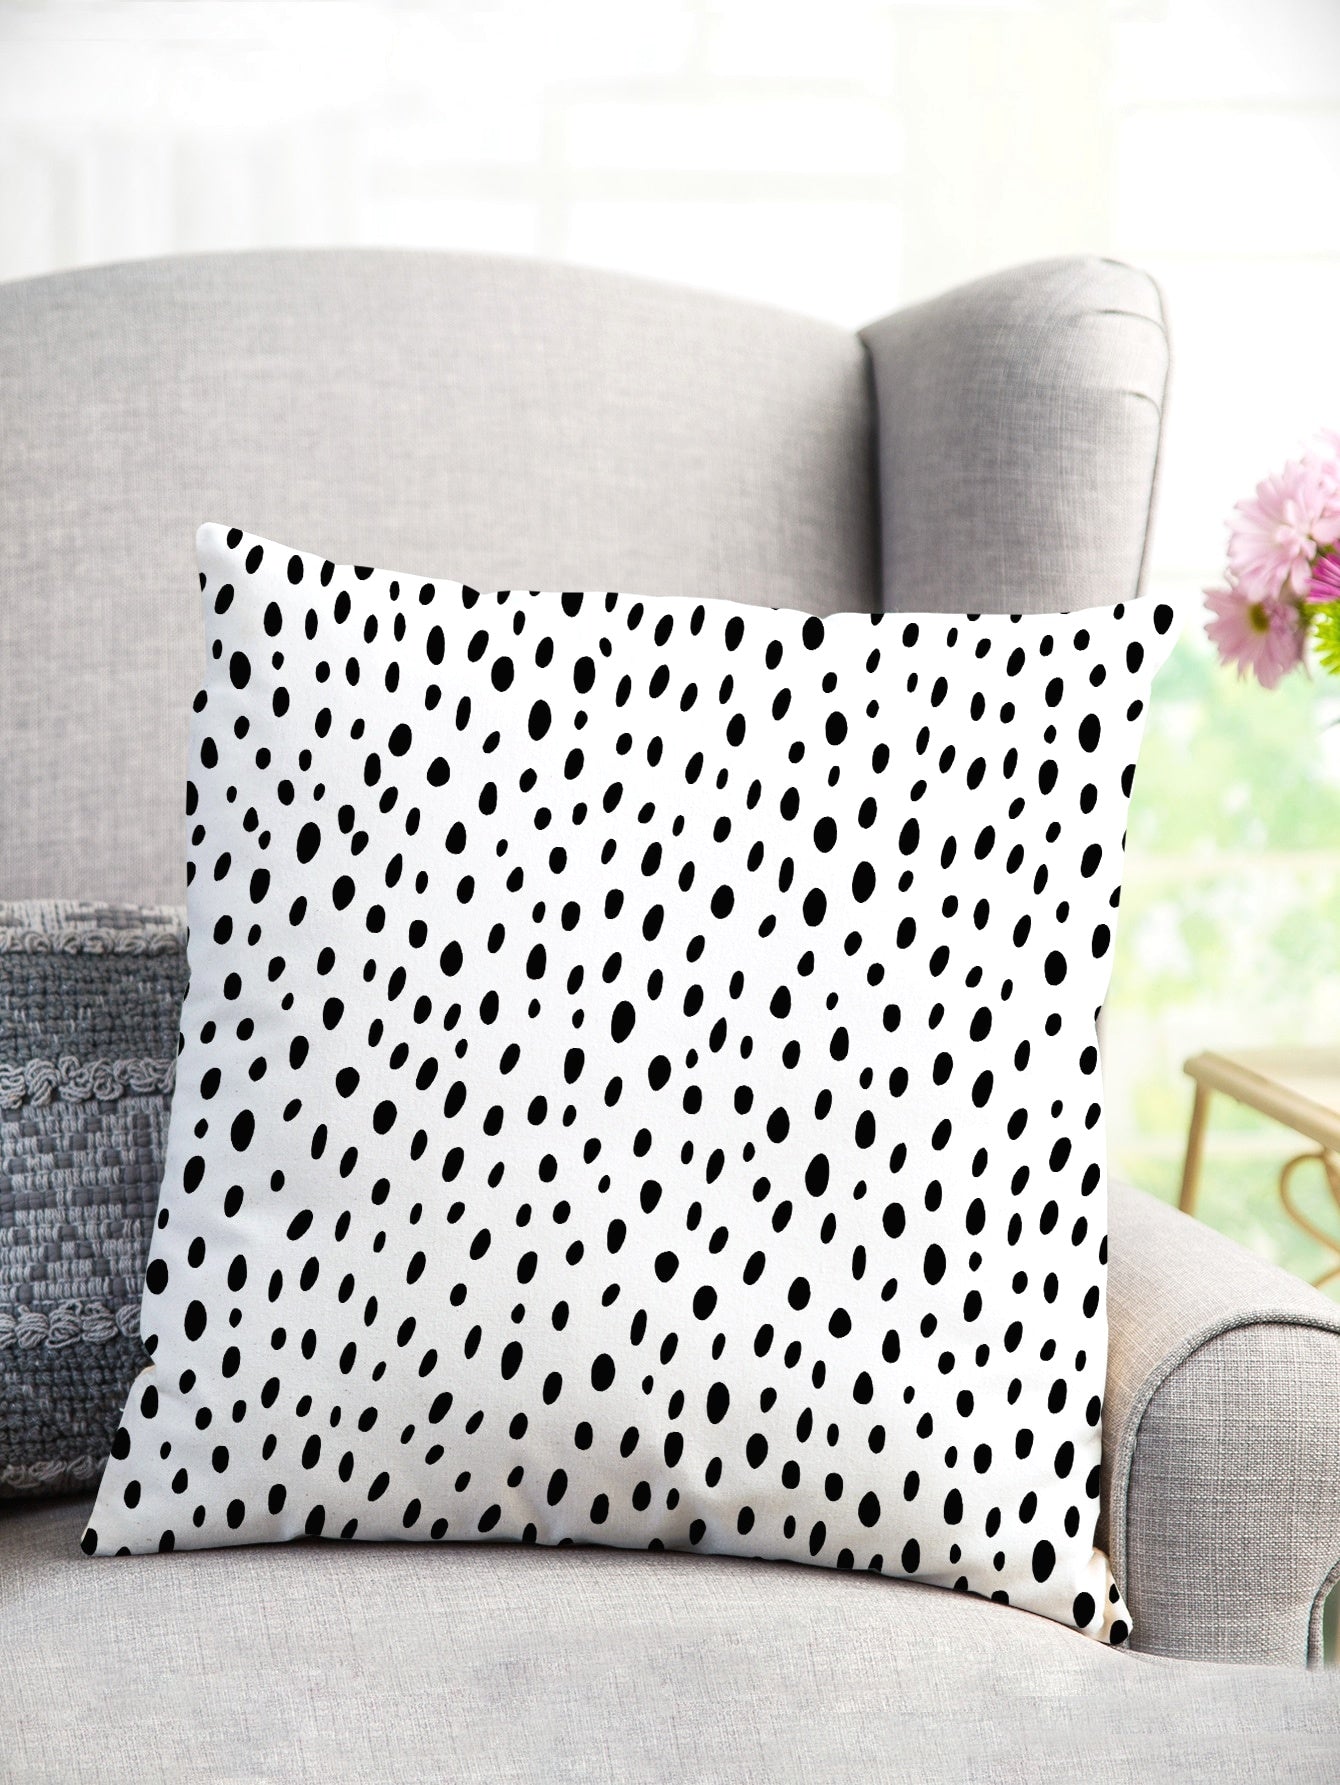 Dalmatian Print Cushion Cover without Filler - Home Decor